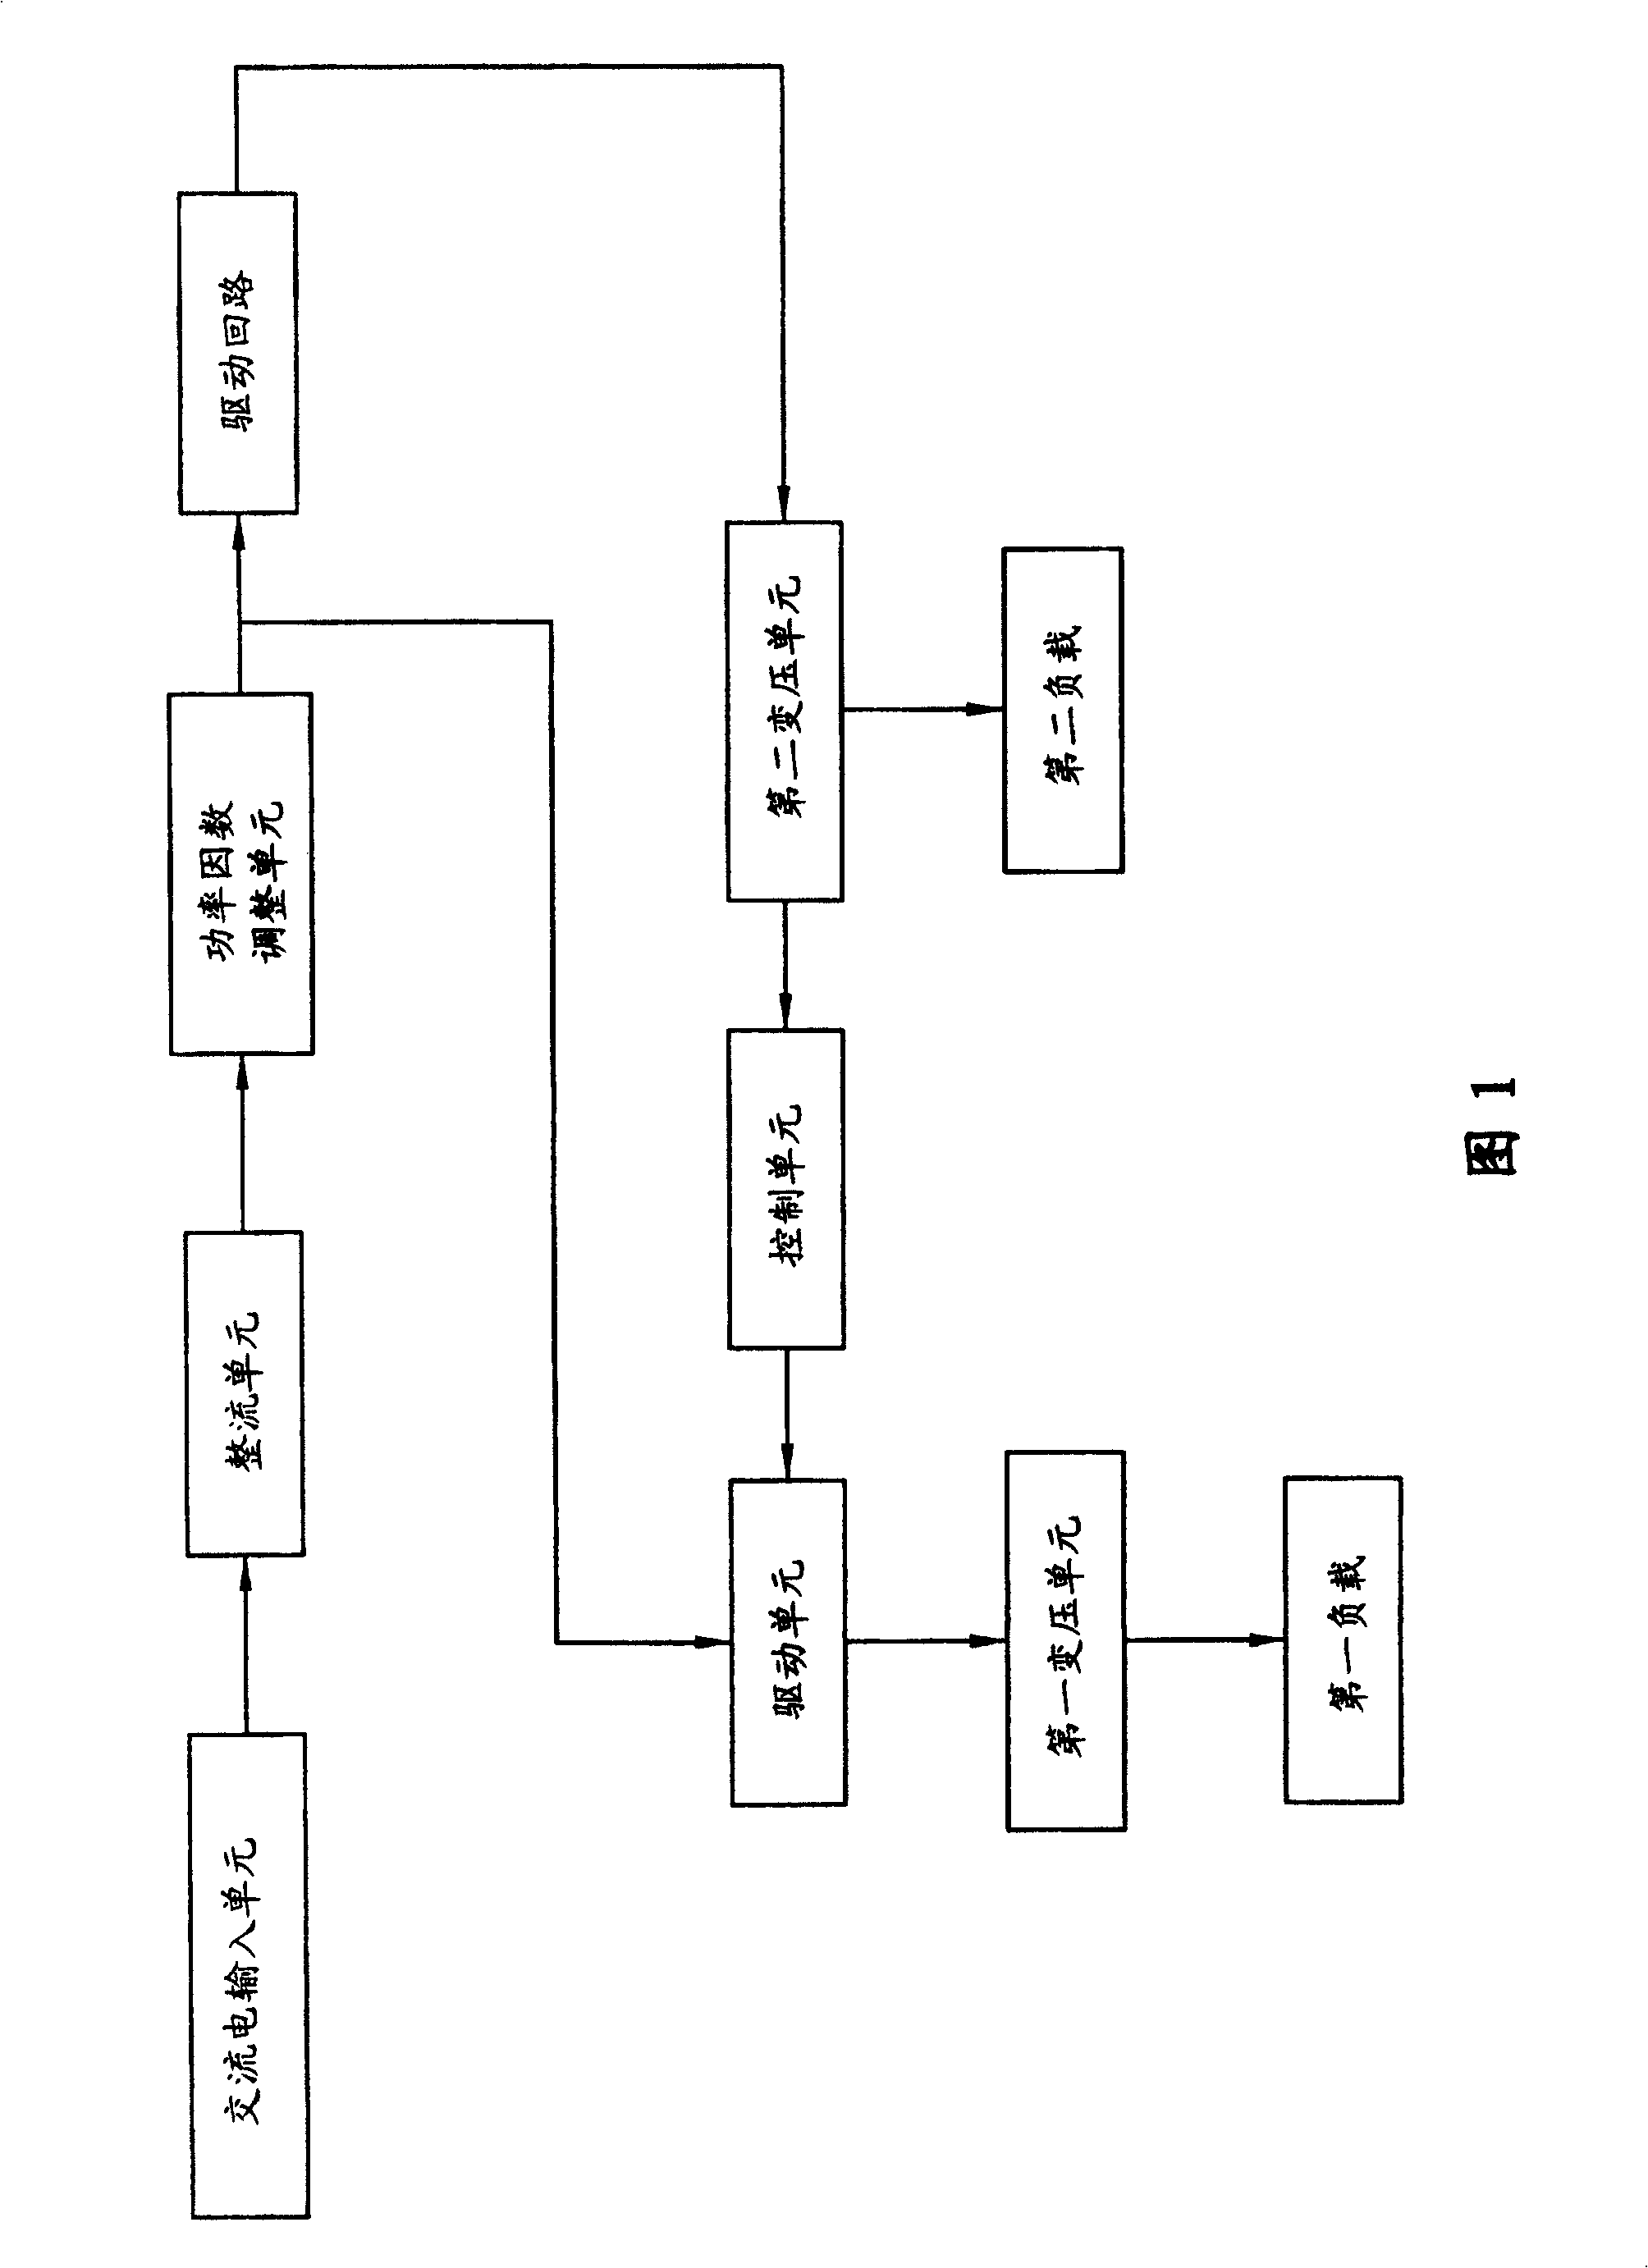 Inverter circuit for suppressing electric power conducted interference